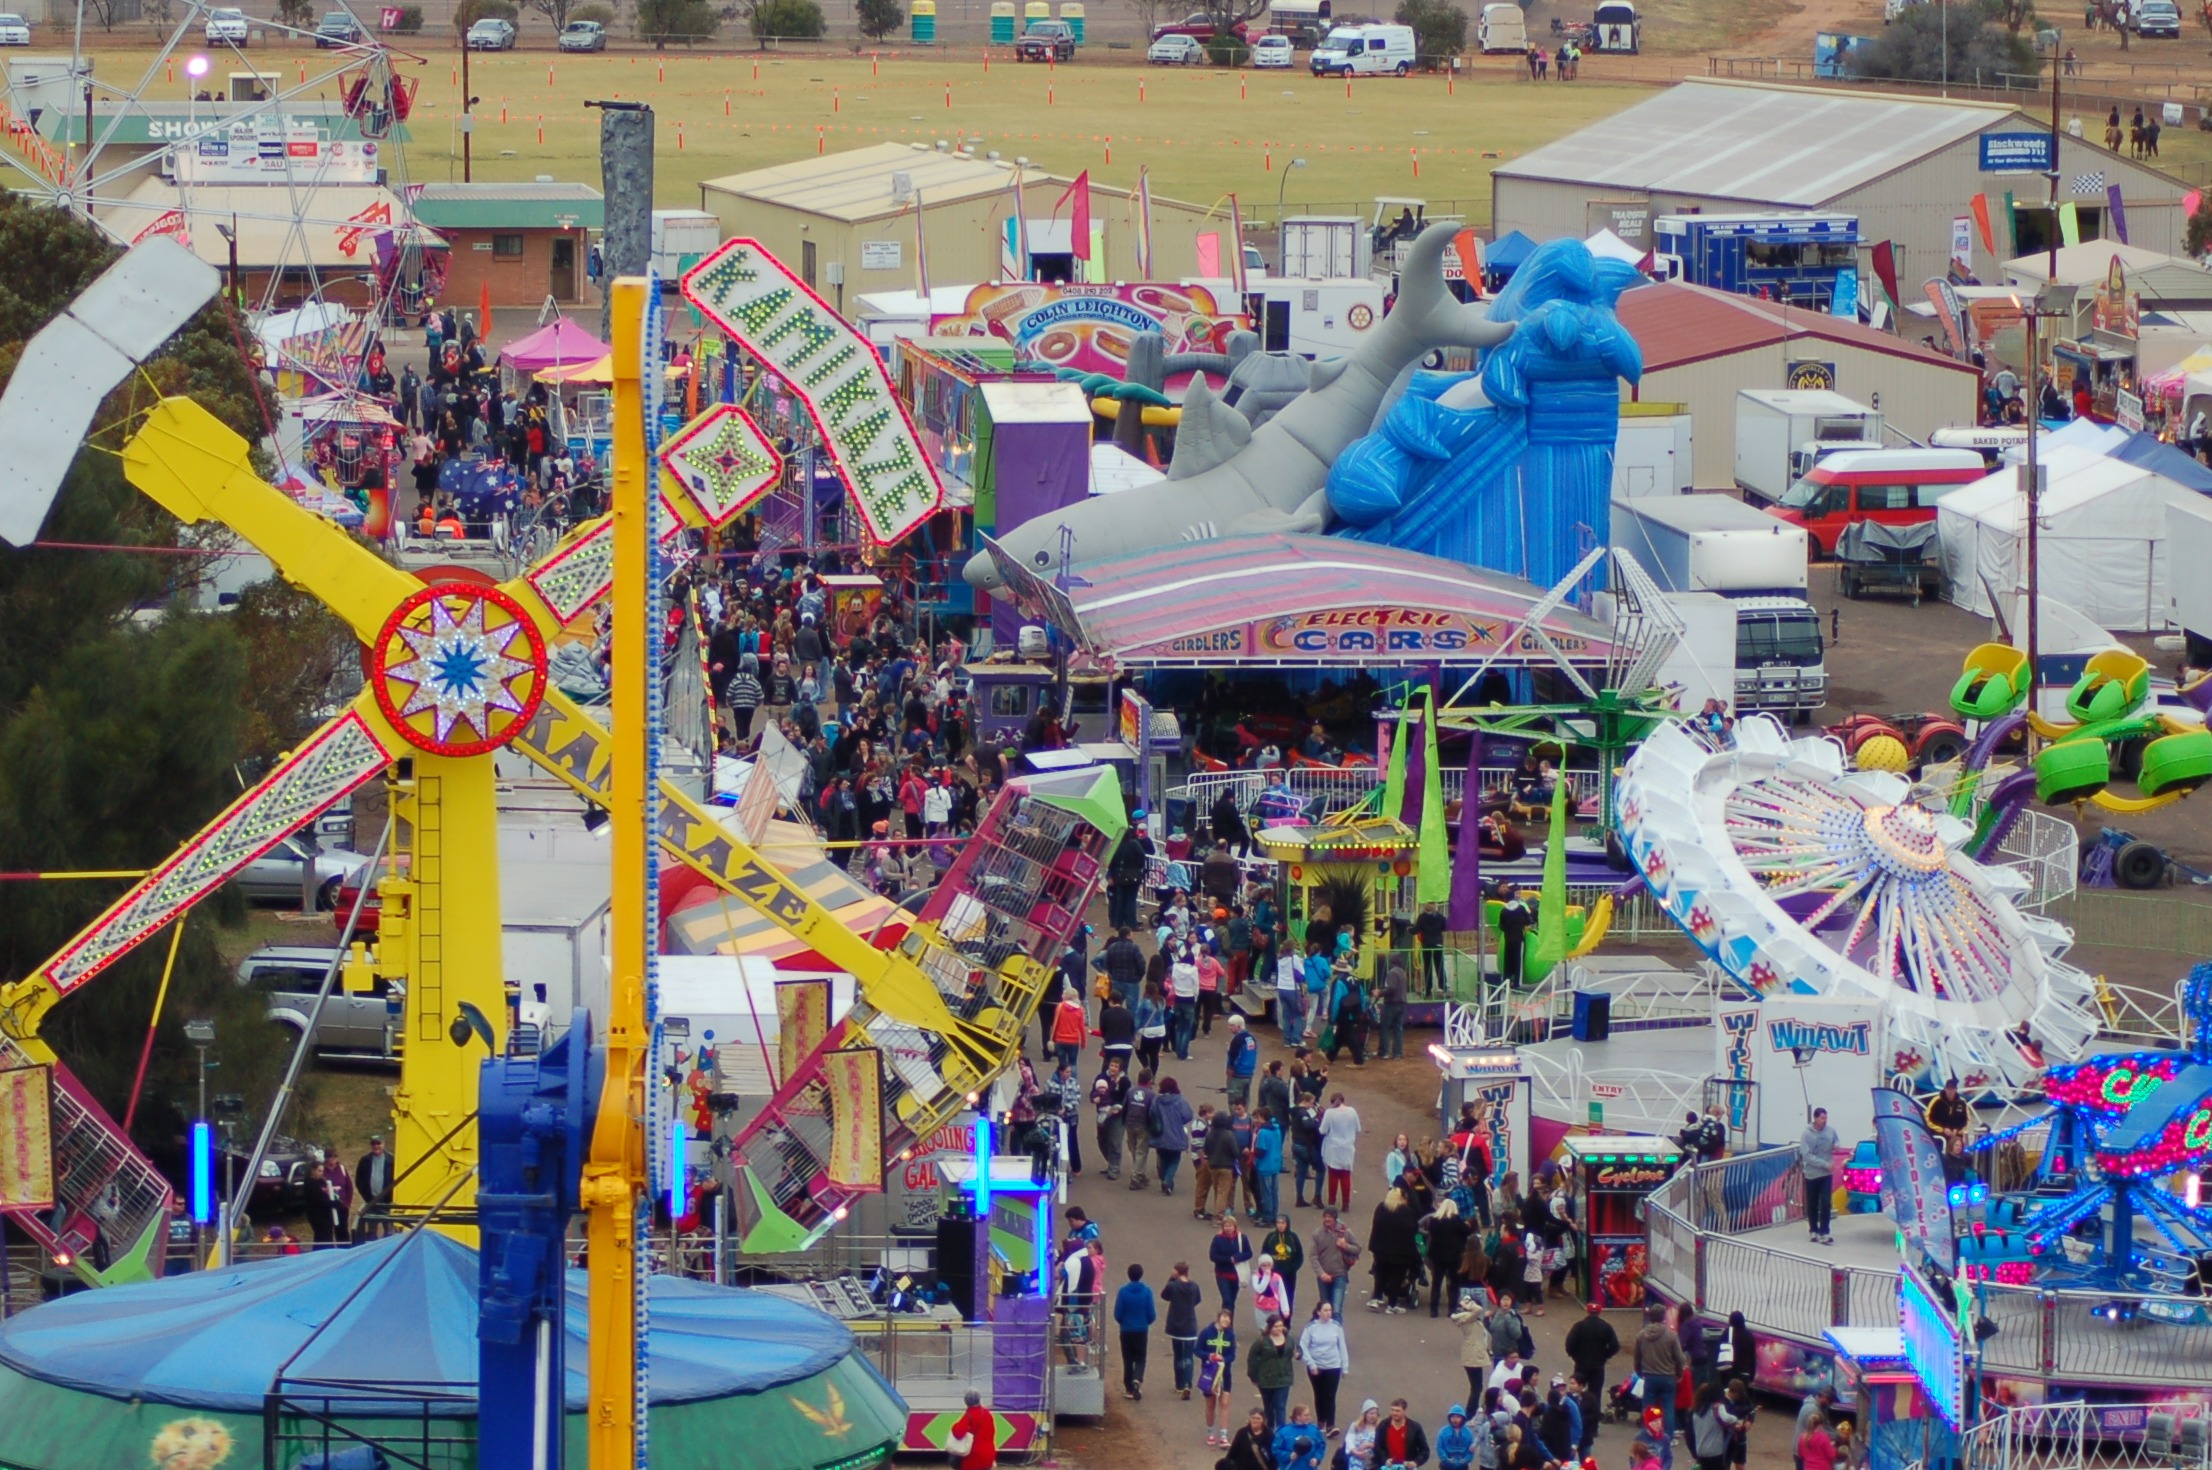 Whyalla Show